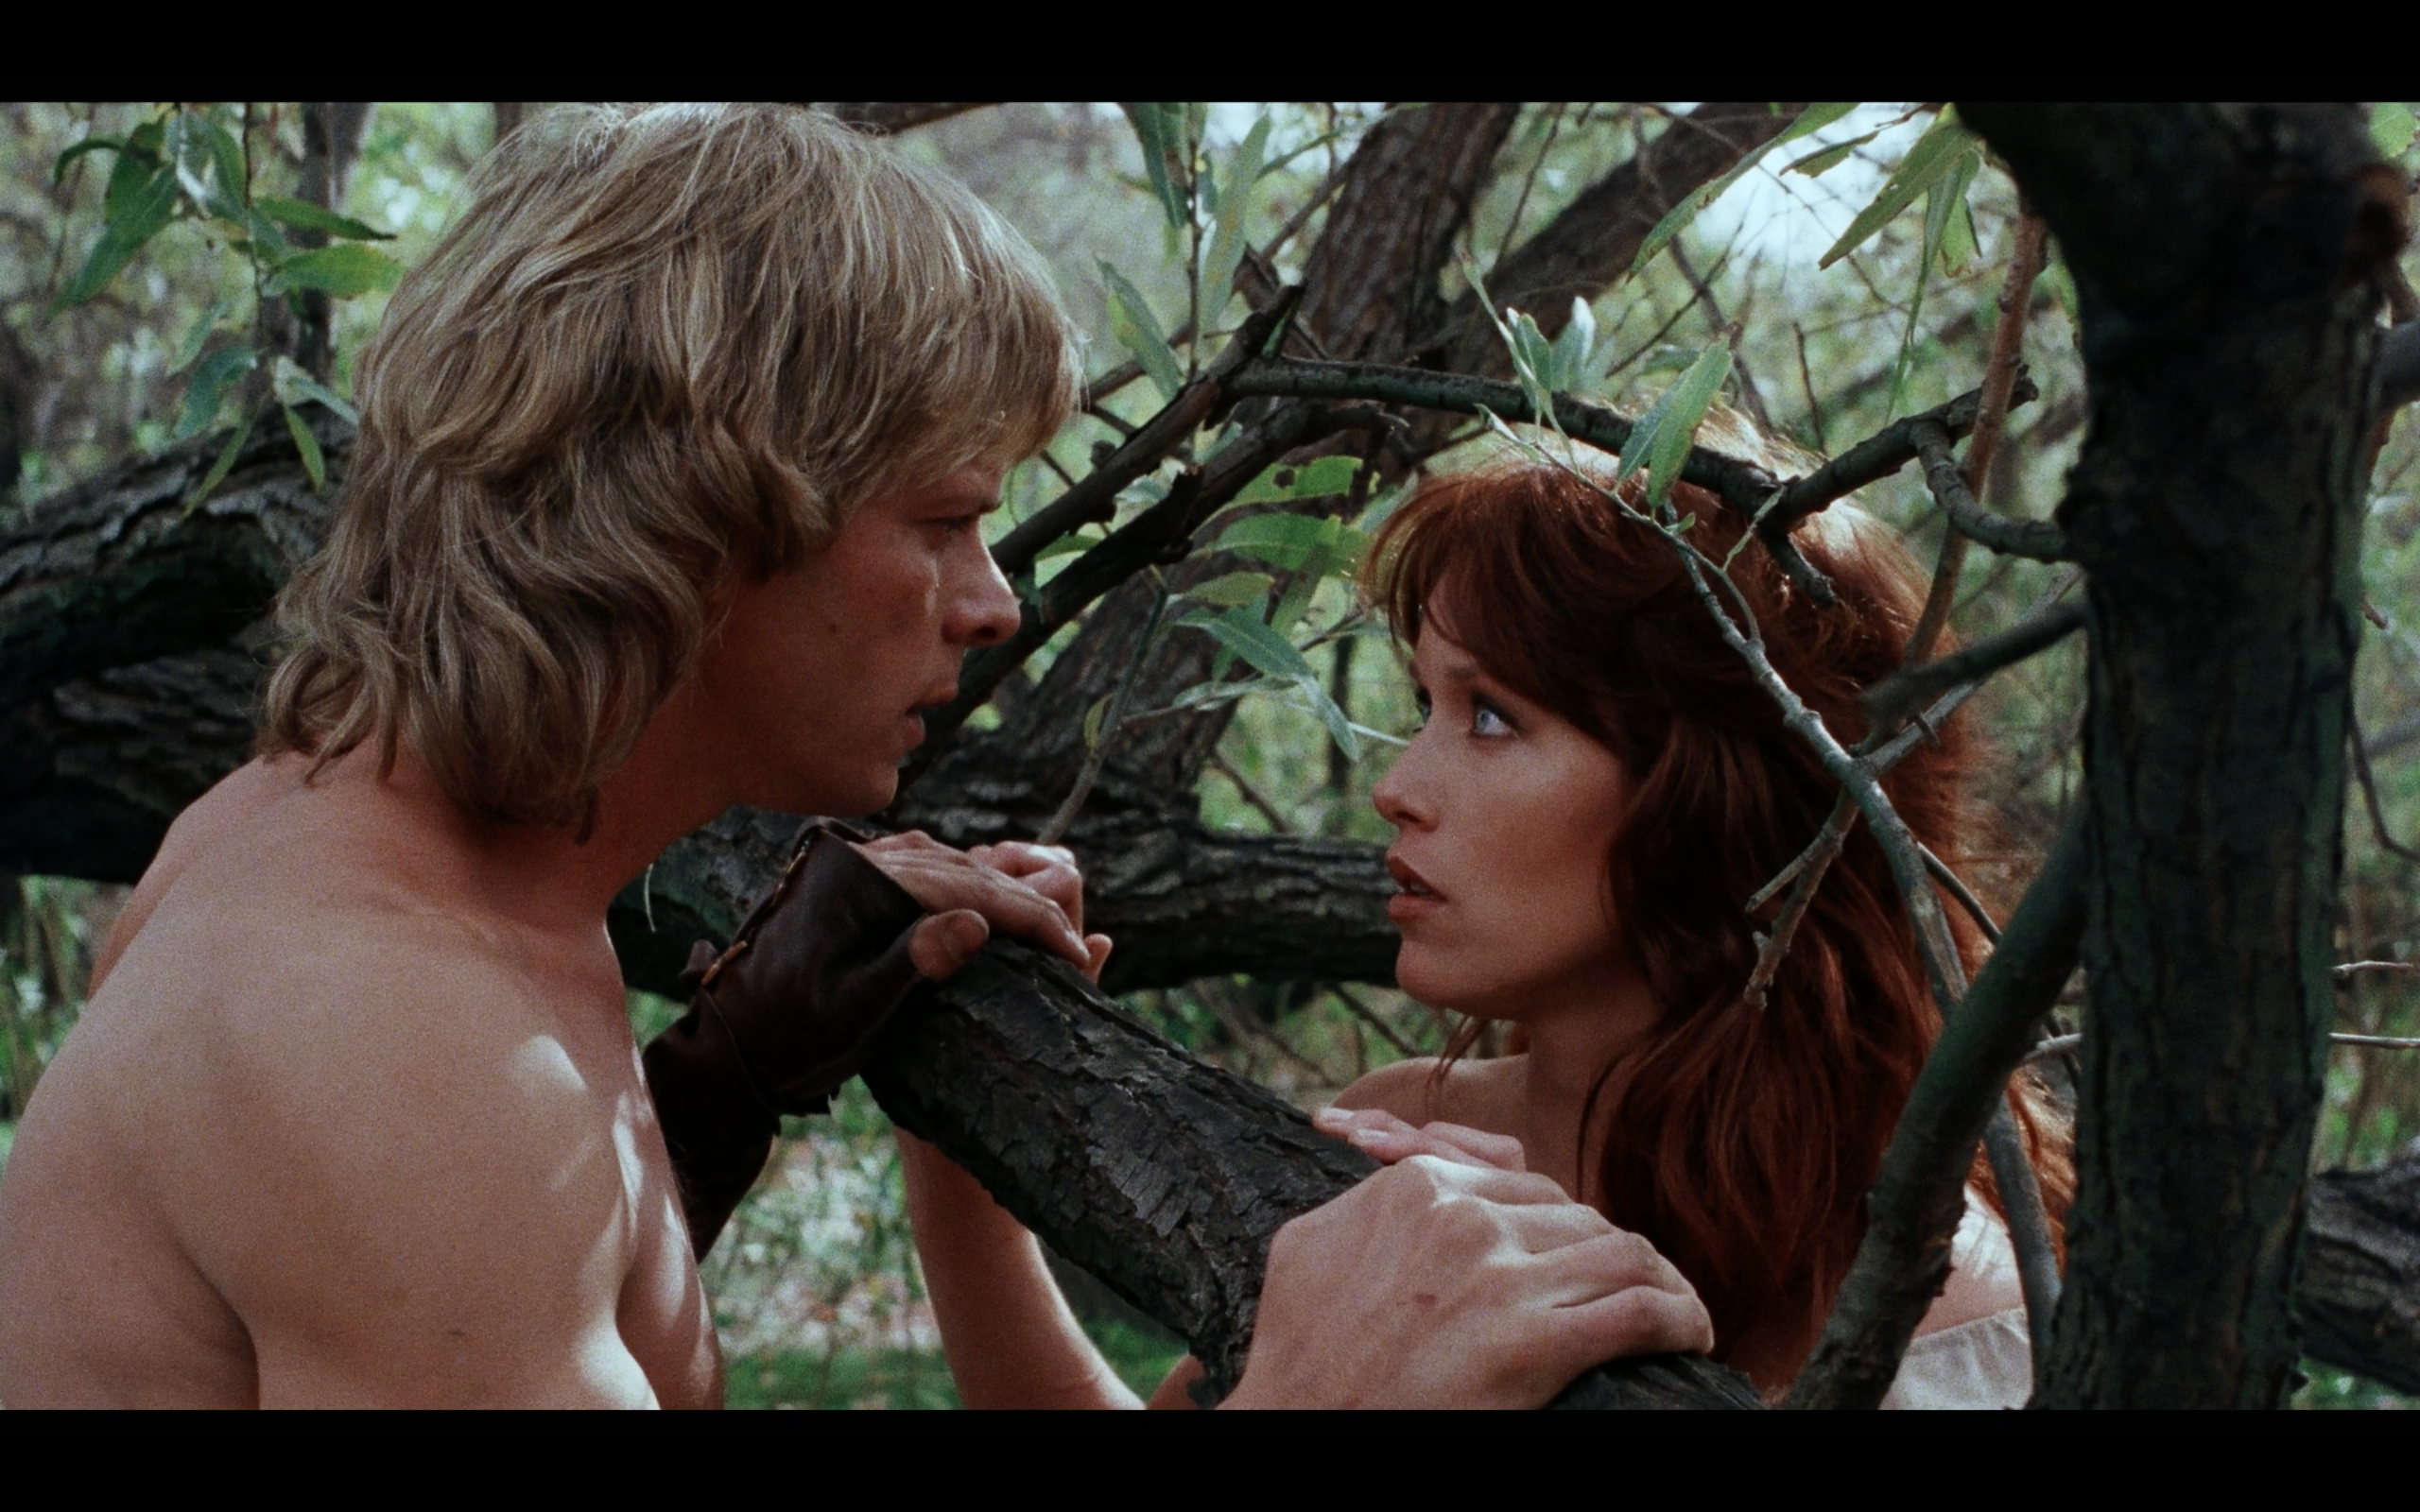 The-Beastmaster-4K-UHD-Blu-ray-Review-High-Def-Digest-2.